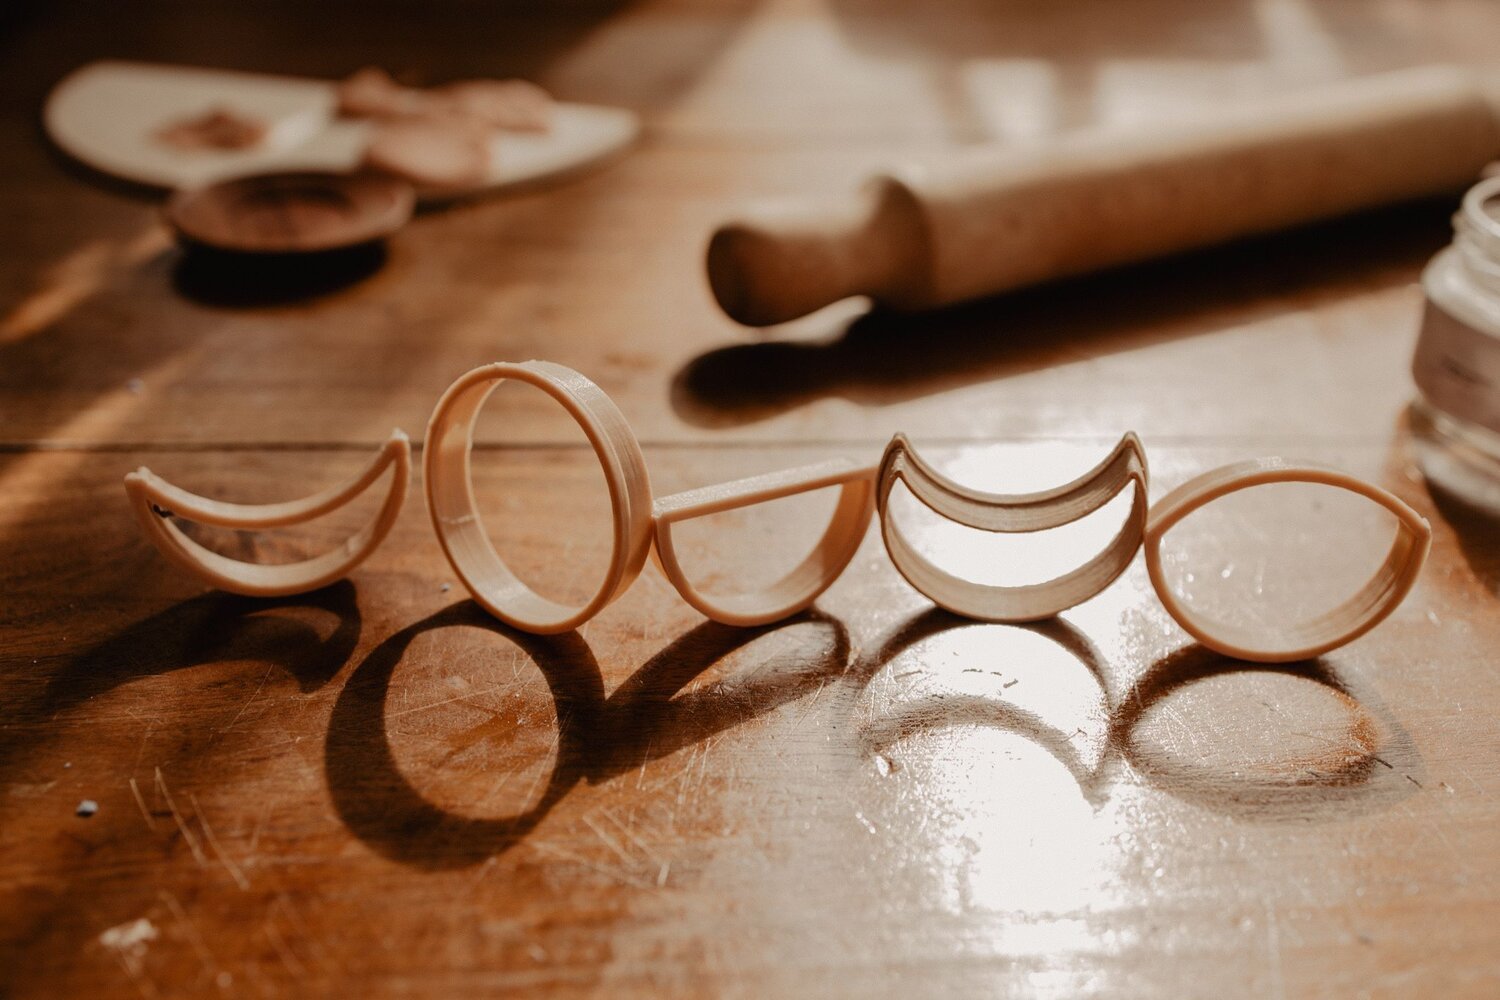 MINI MOON PHASES ECO CUTTER SET by KINFOLK PANTRY - The Playful Collective